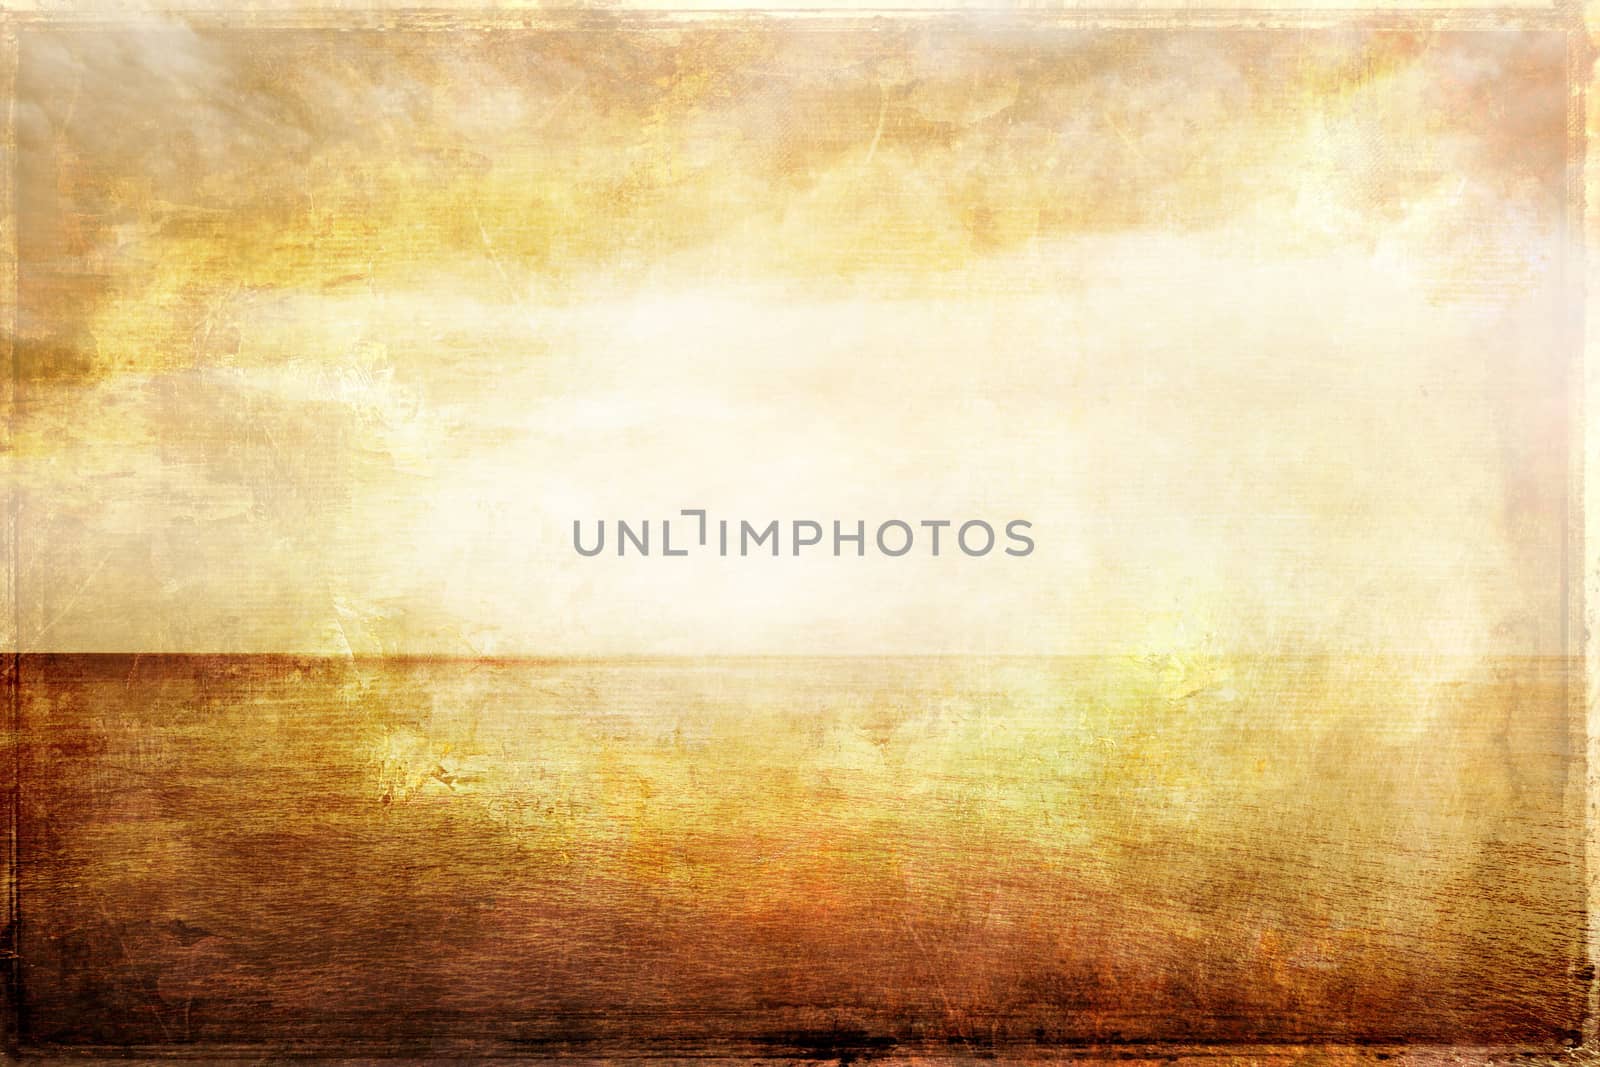 Grungy vintage image of light, sea and sky. Artistic background.